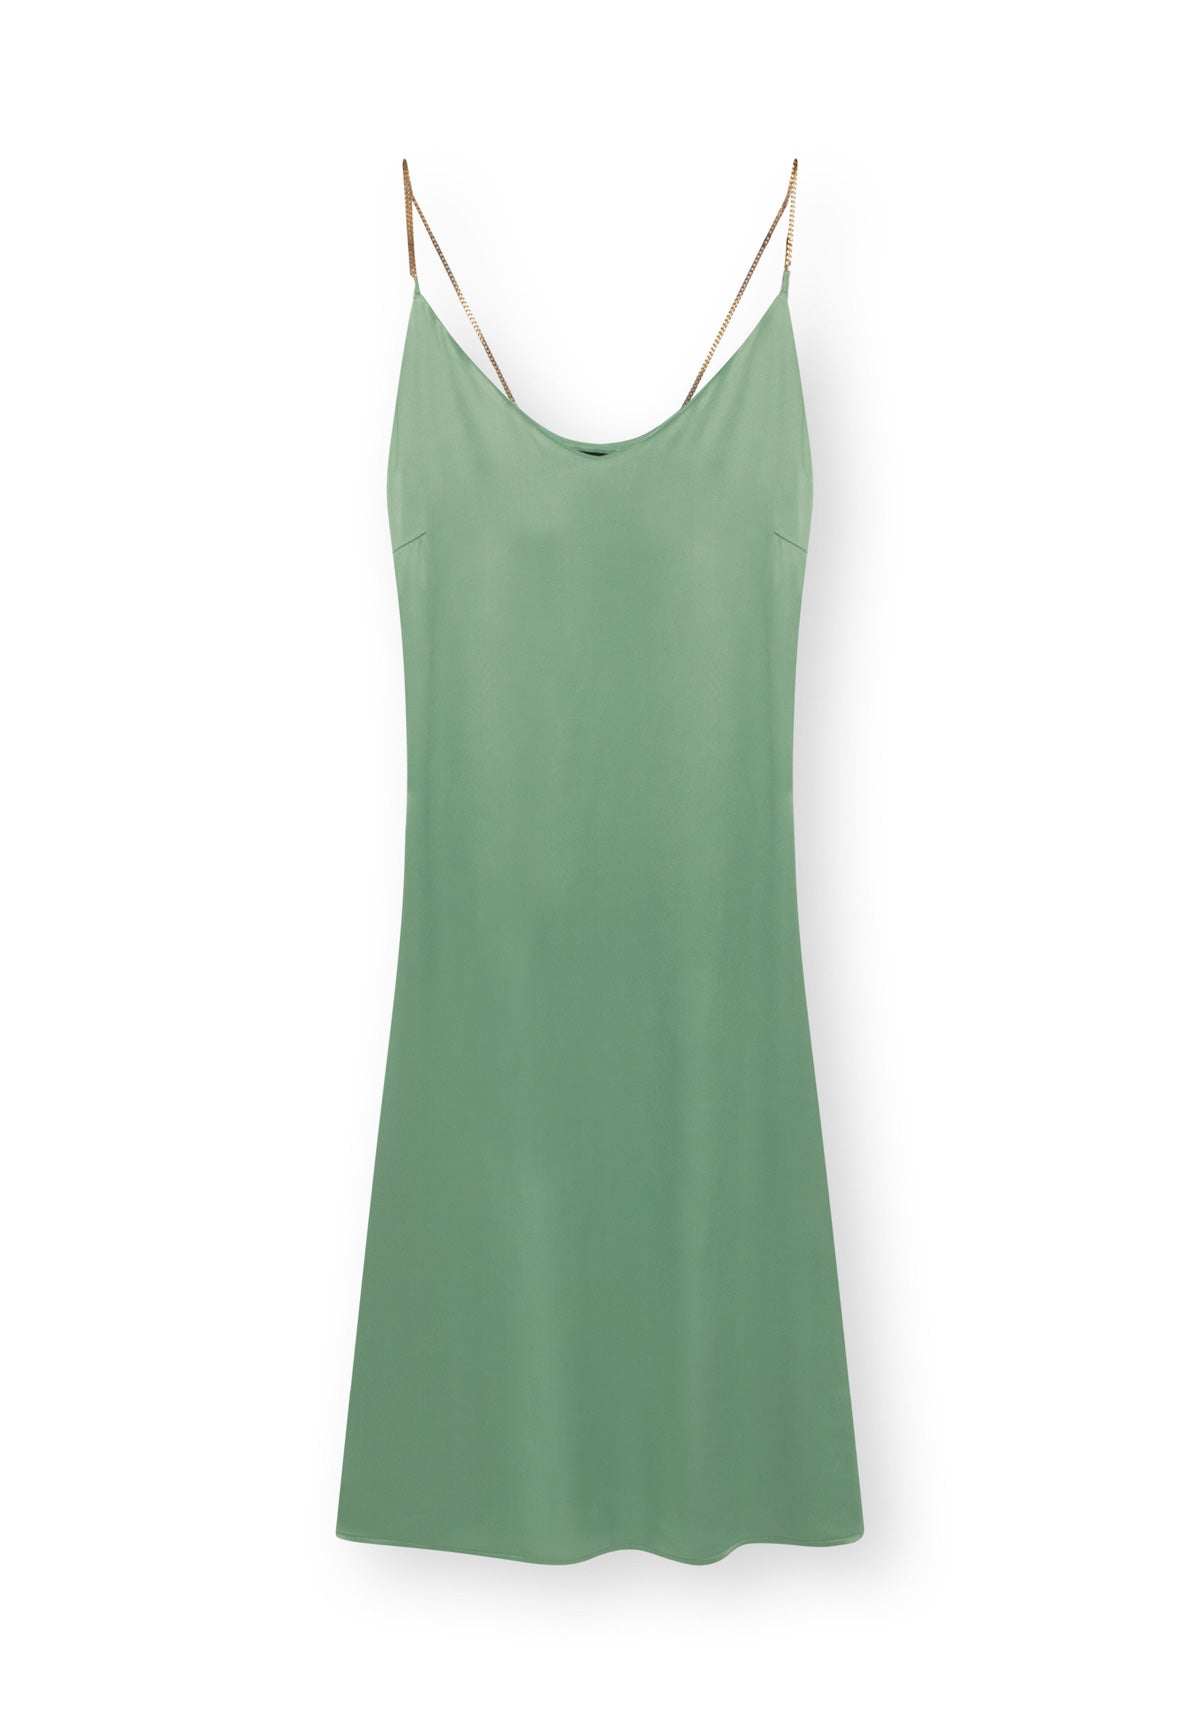 Dress ELANIE in Mild Green by LOVJOI made from sustainable ENKA® viscose and ECOVERO™